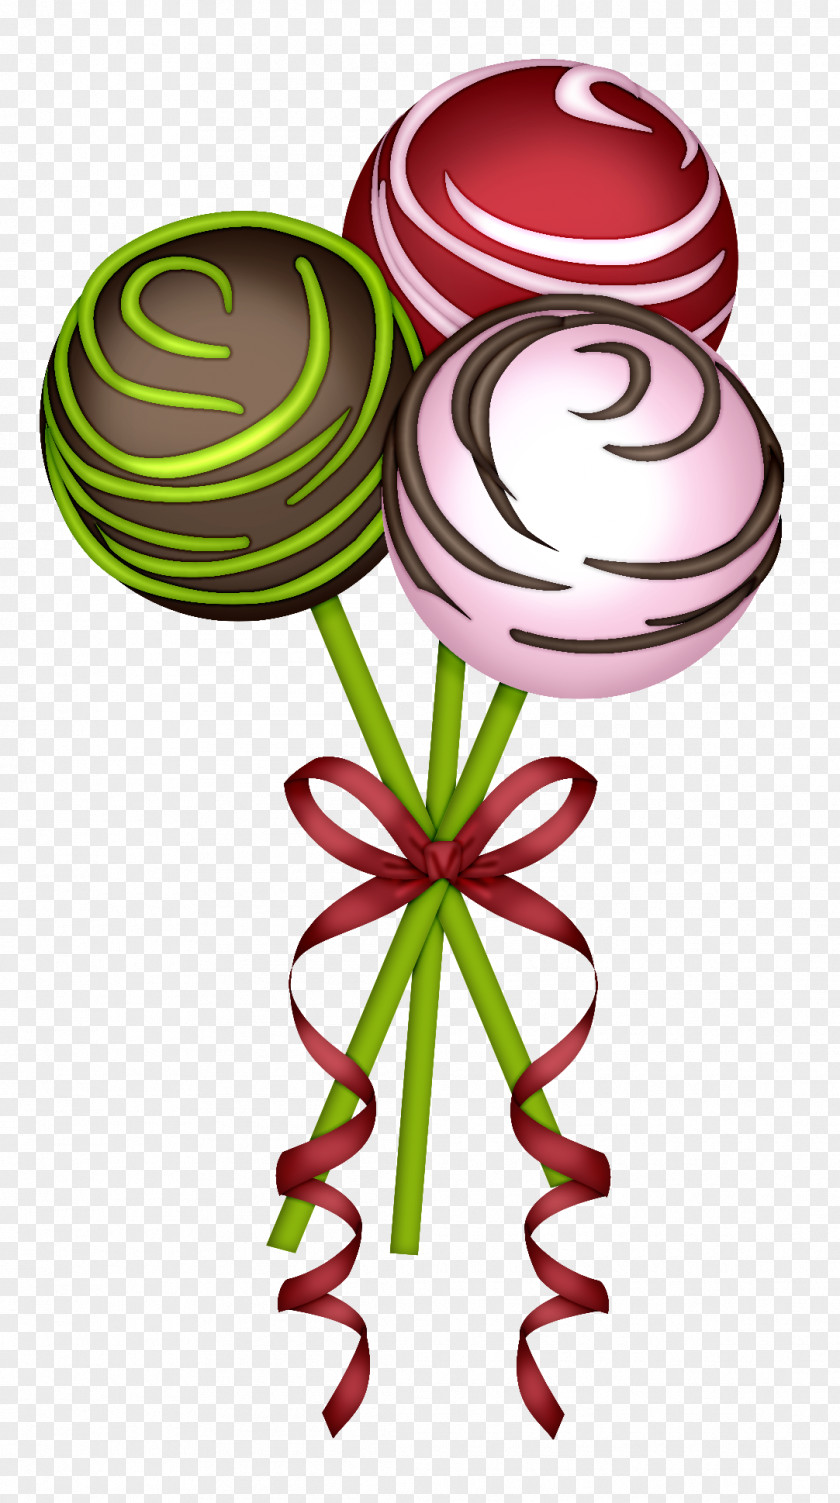 Peppermints Insignia Lollipop Cupcake Frosting & Icing Clip Art Cake Pop PNG